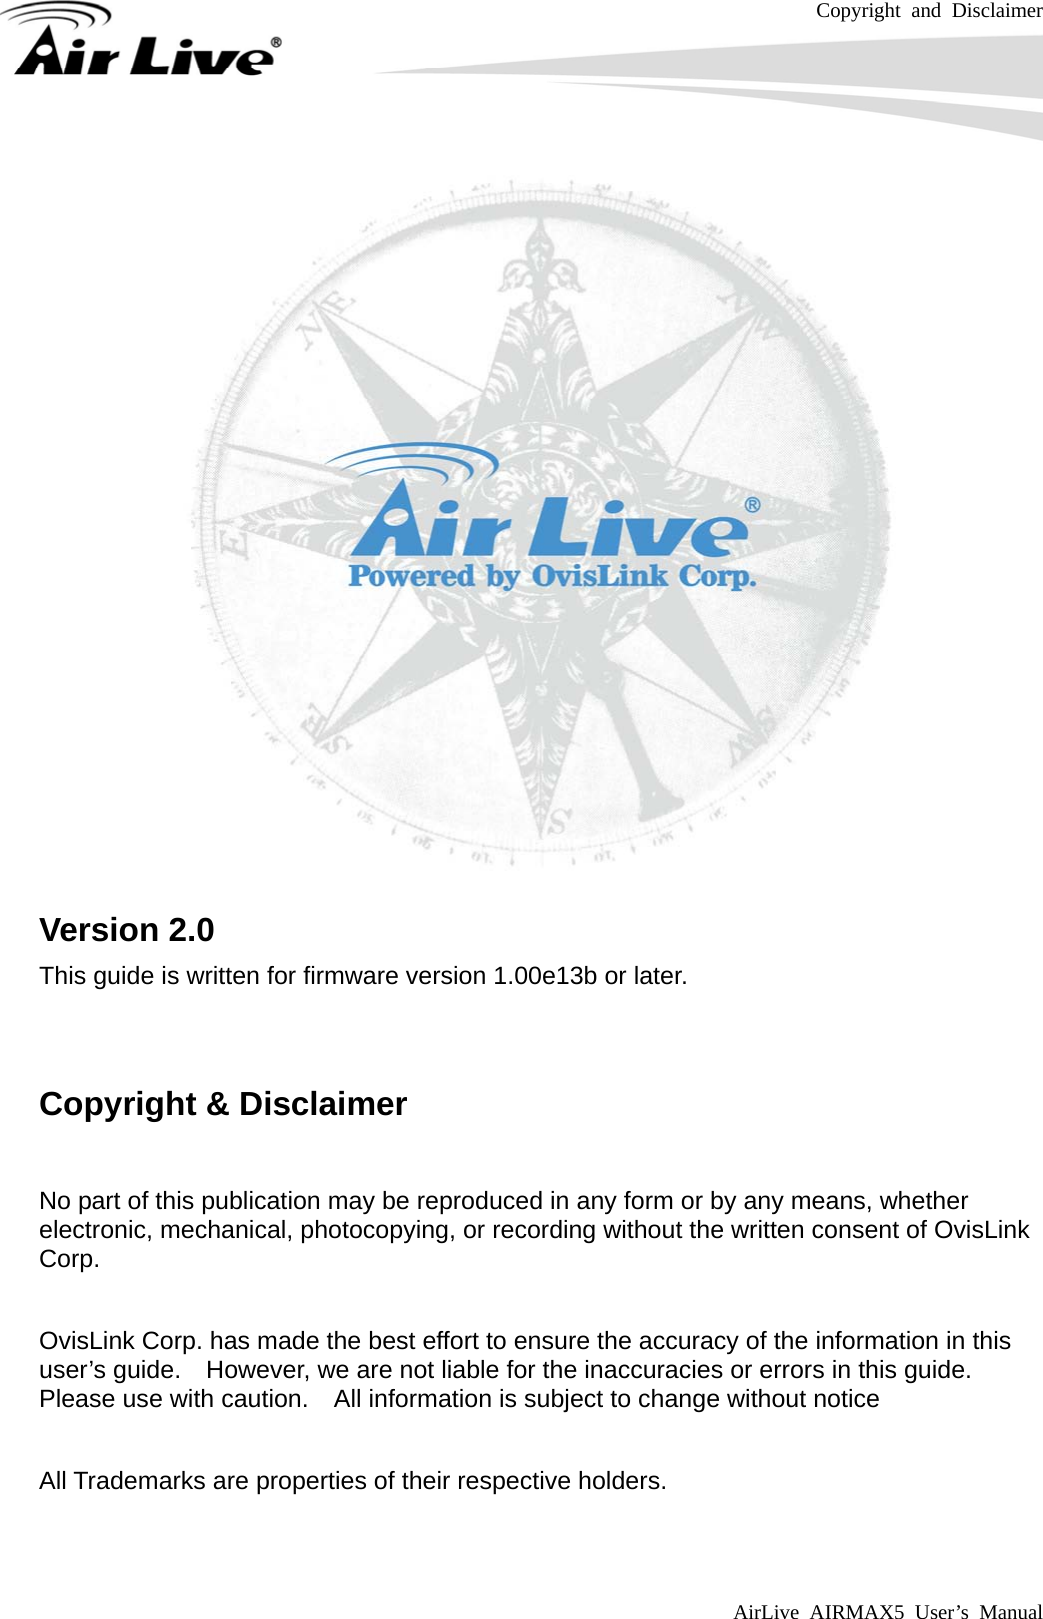 Copyright and Disclaimer AirLive AIRMAX5 User’s Manual      Version 2.0 This guide is written for firmware version 1.00e13b or later.   Copyright &amp; Disclaimer  No part of this publication may be reproduced in any form or by any means, whether electronic, mechanical, photocopying, or recording without the written consent of OvisLink Corp.   OvisLink Corp. has made the best effort to ensure the accuracy of the information in this user’s guide.    However, we are not liable for the inaccuracies or errors in this guide.   Please use with caution.    All information is subject to change without notice  All Trademarks are properties of their respective holders.  